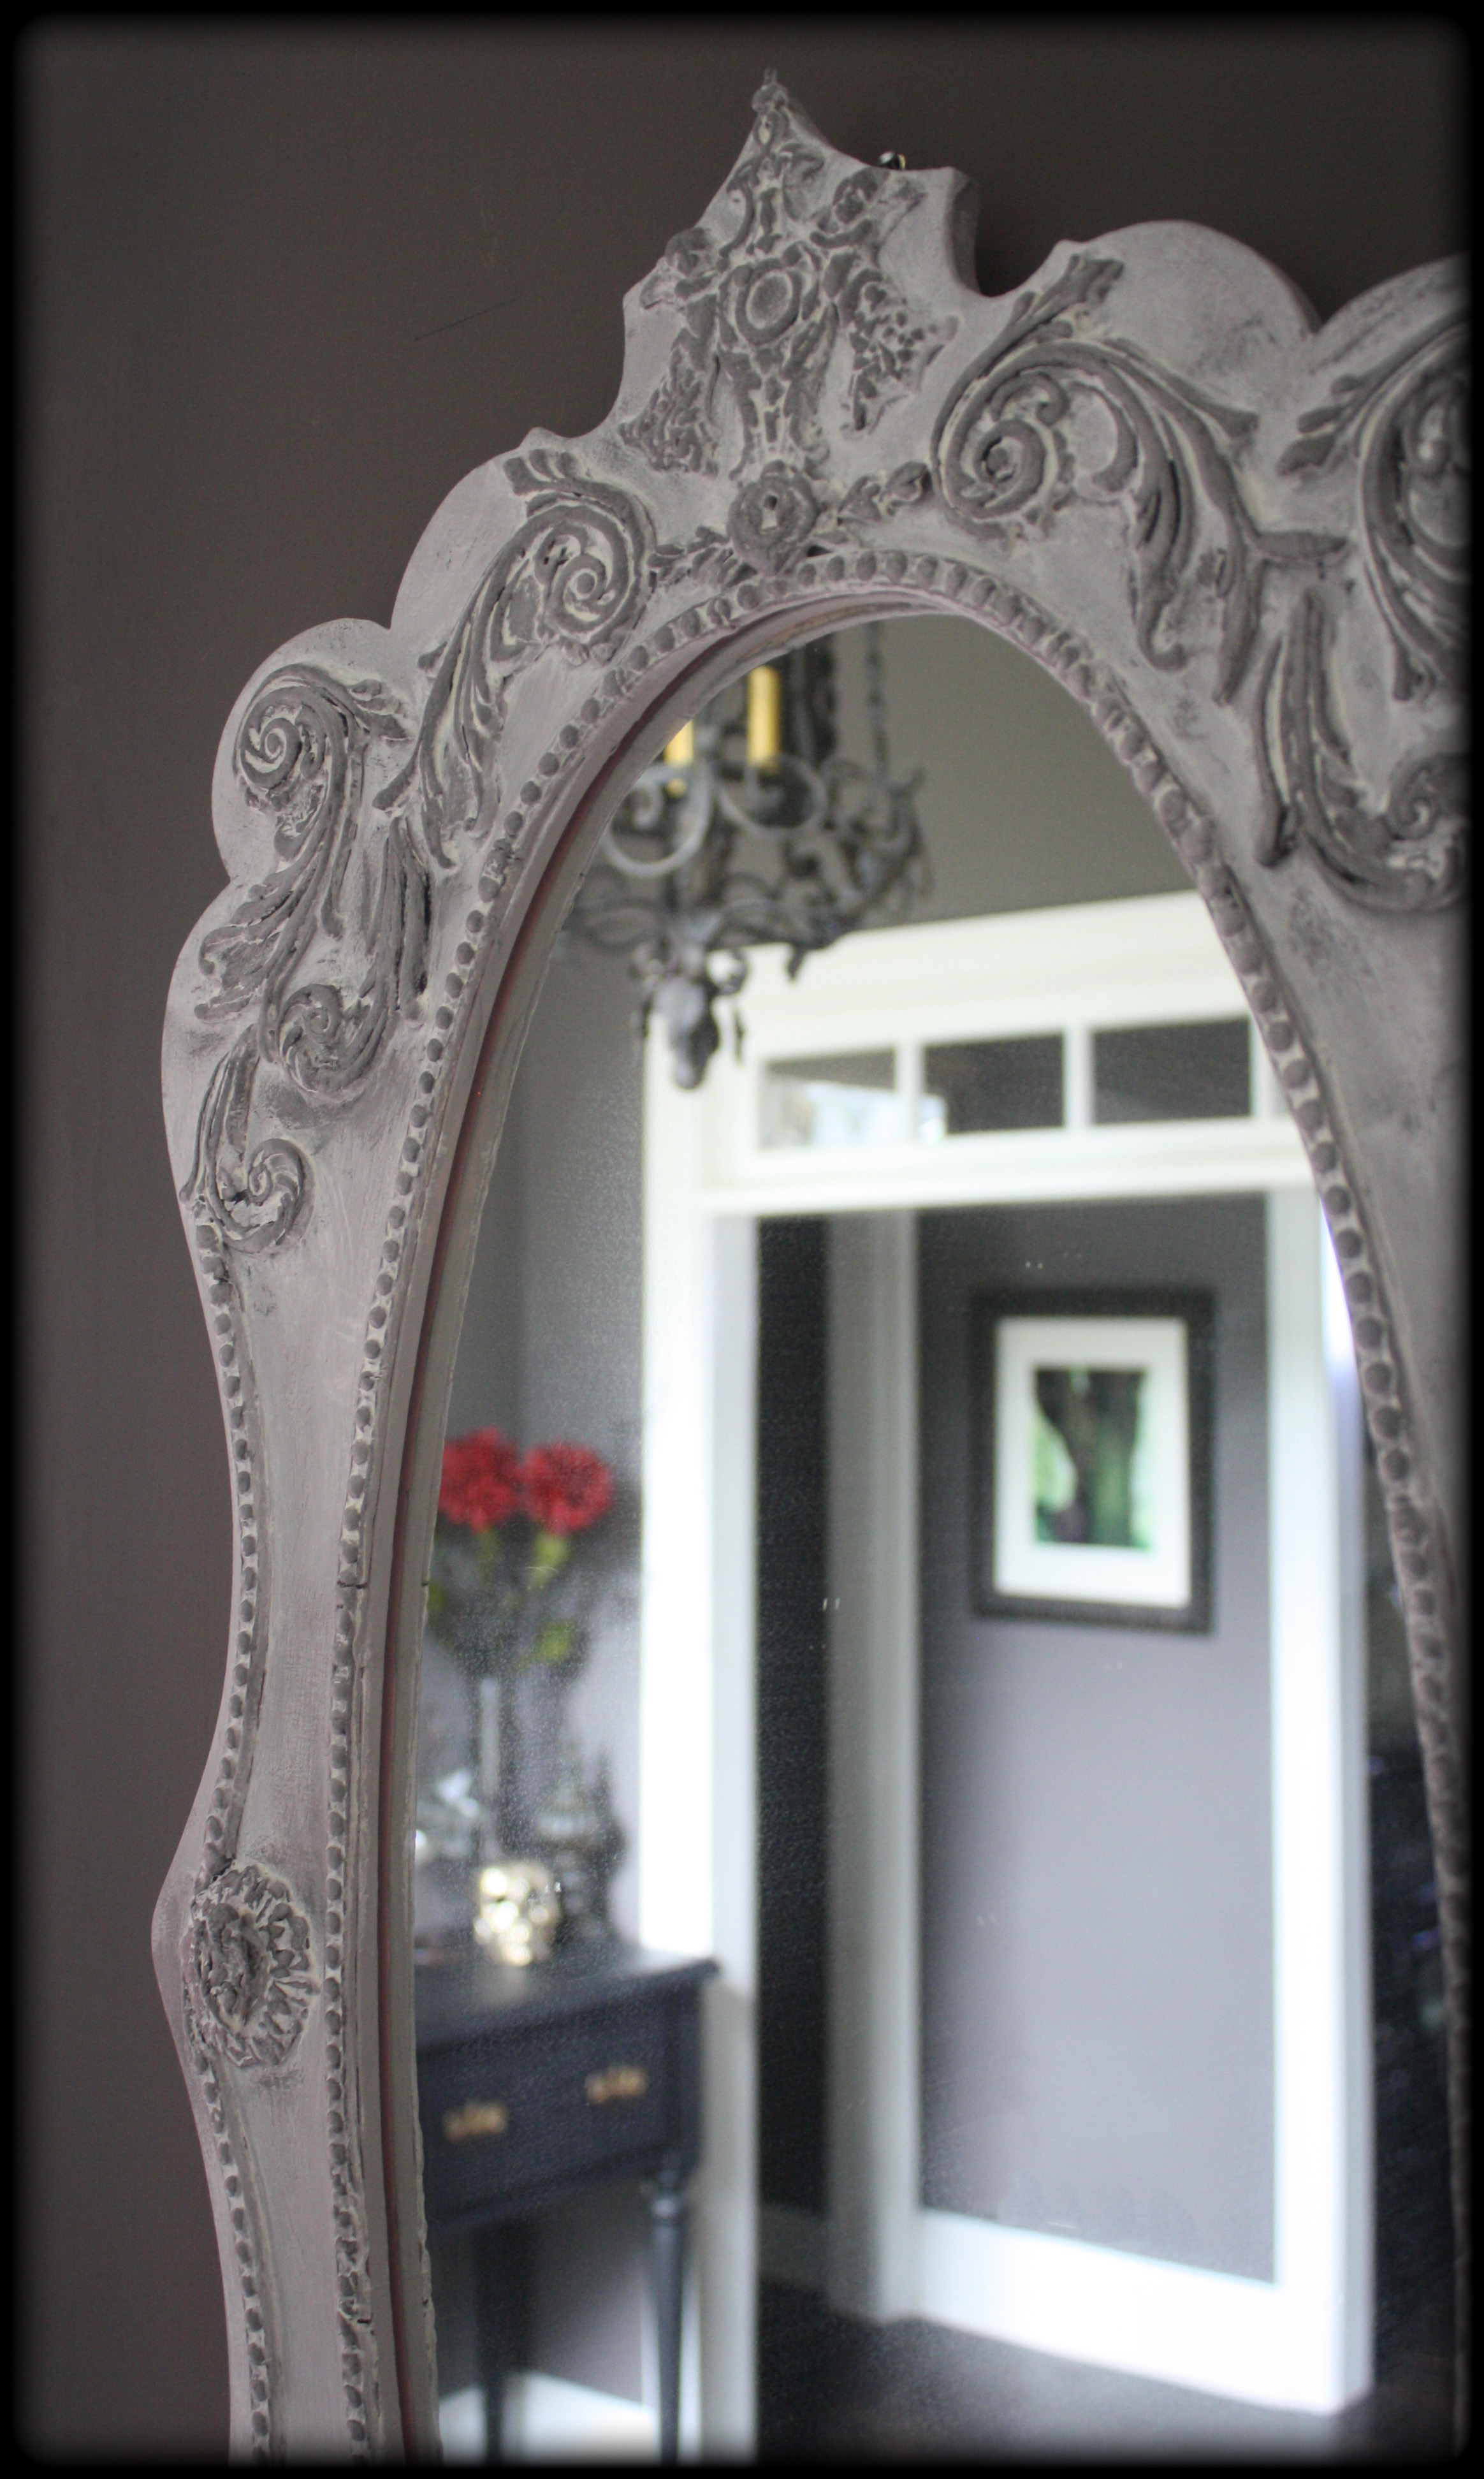 DIY Baroque Mirror in a Weathered Stone Grey Antique Finish | Faux Stone | Distress and Antique a Frame | Clay Casting | Faux Paint | www.MeandAnnabelLee.com